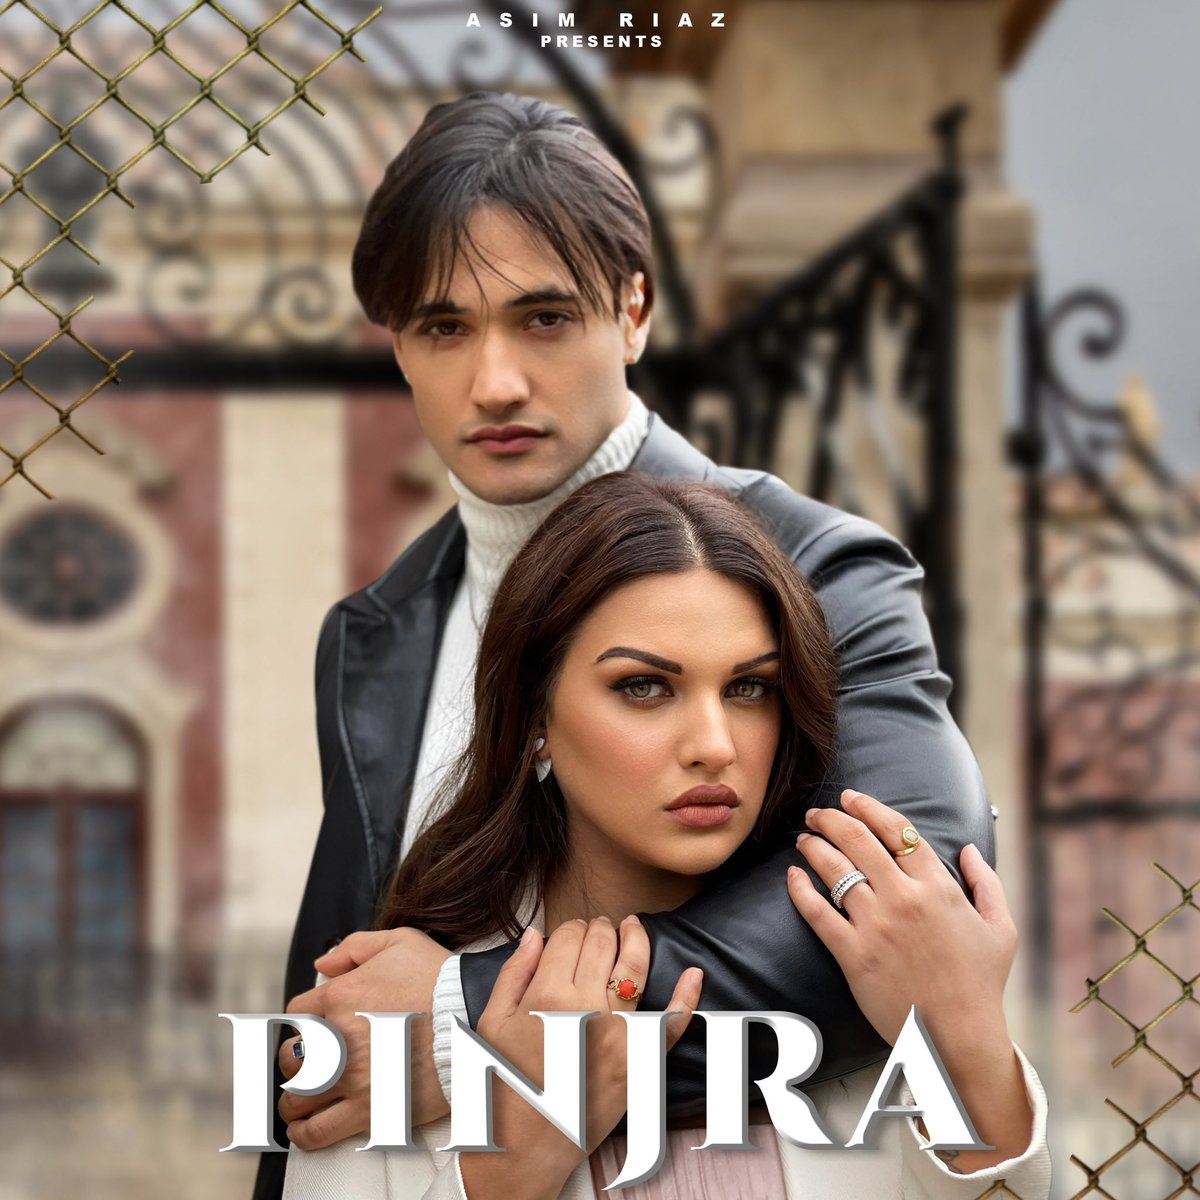 “Before the day i met you, life was so unkind but you’re the key to my peace of mind”

#PINJRA out on 06.05.2022 
Official TEASER out tomorrow on my youtube channel at 1 pm.

#asimriaz ft #himanshi

#pinjra#asimriaz#asimsquad #himanshikhurana#Himanshians#asimanshi#punjabirap